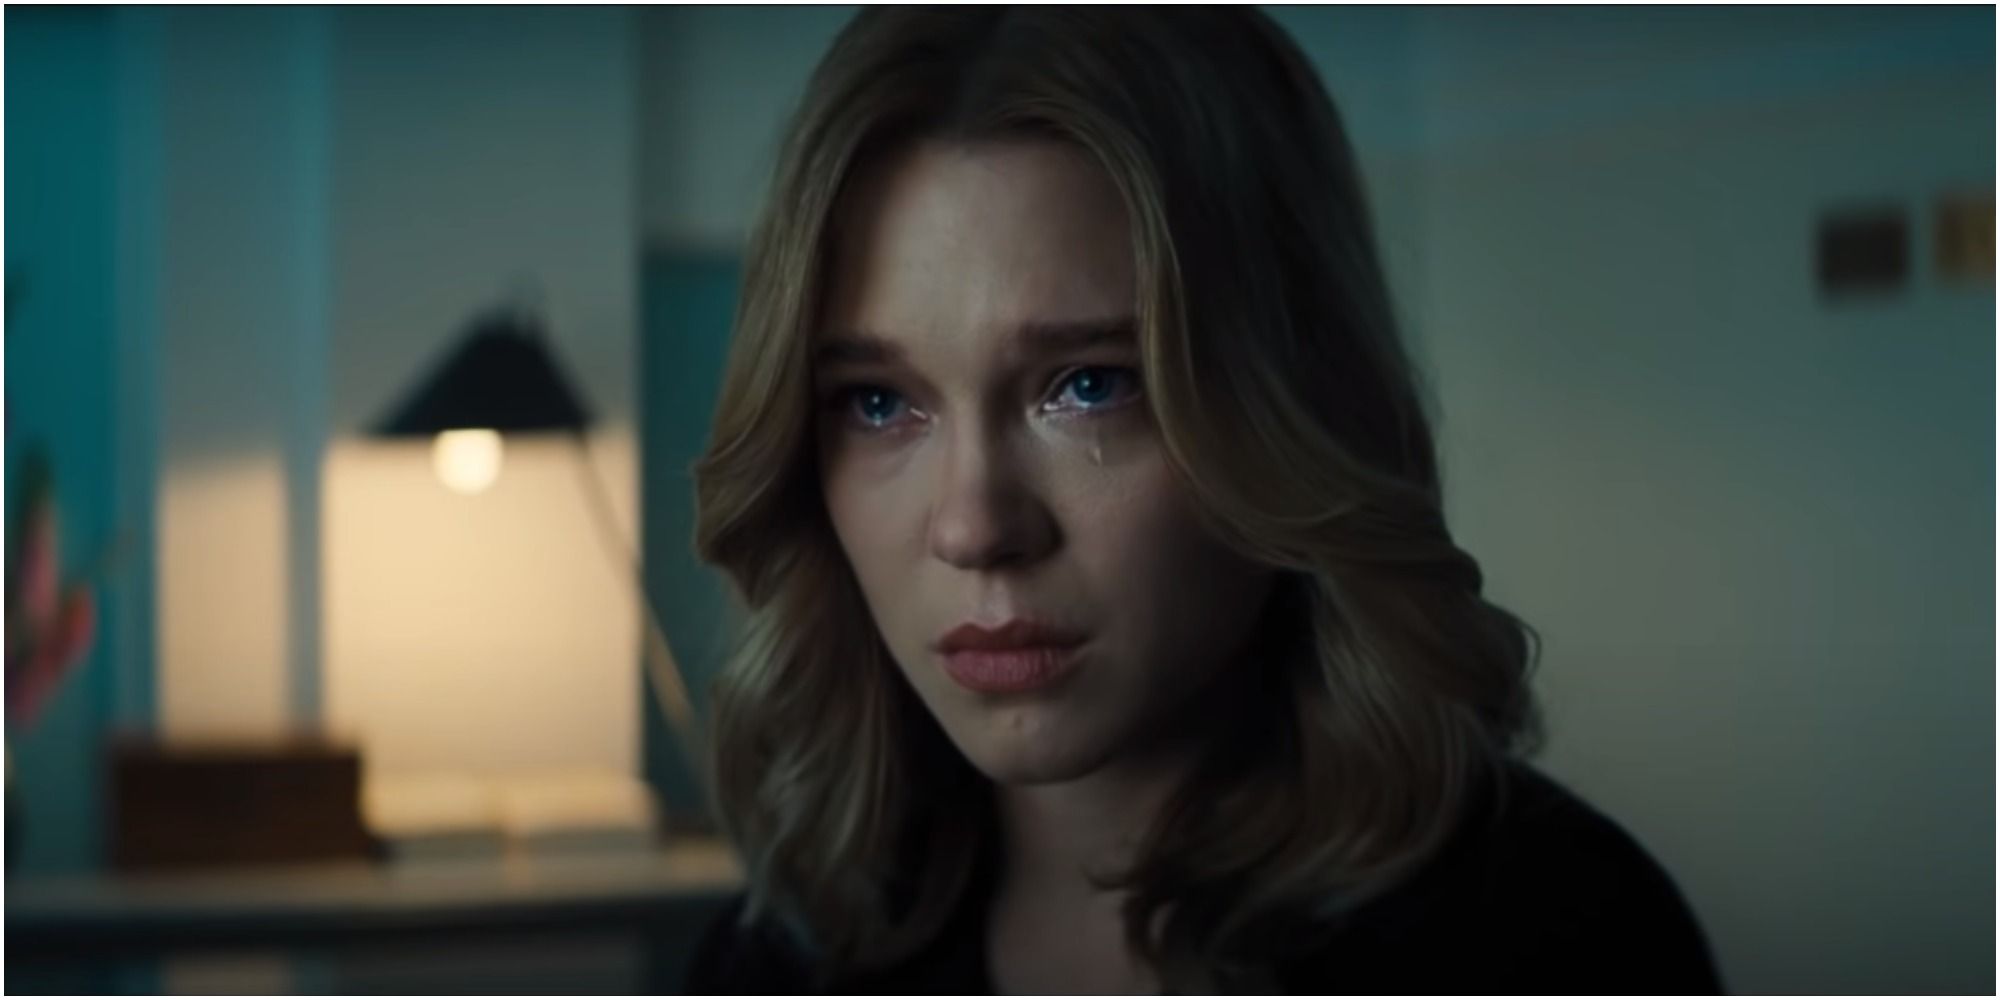 A shot of Lea Seydoux as Dr. Madeleine Swann in the No Time to Die trailer